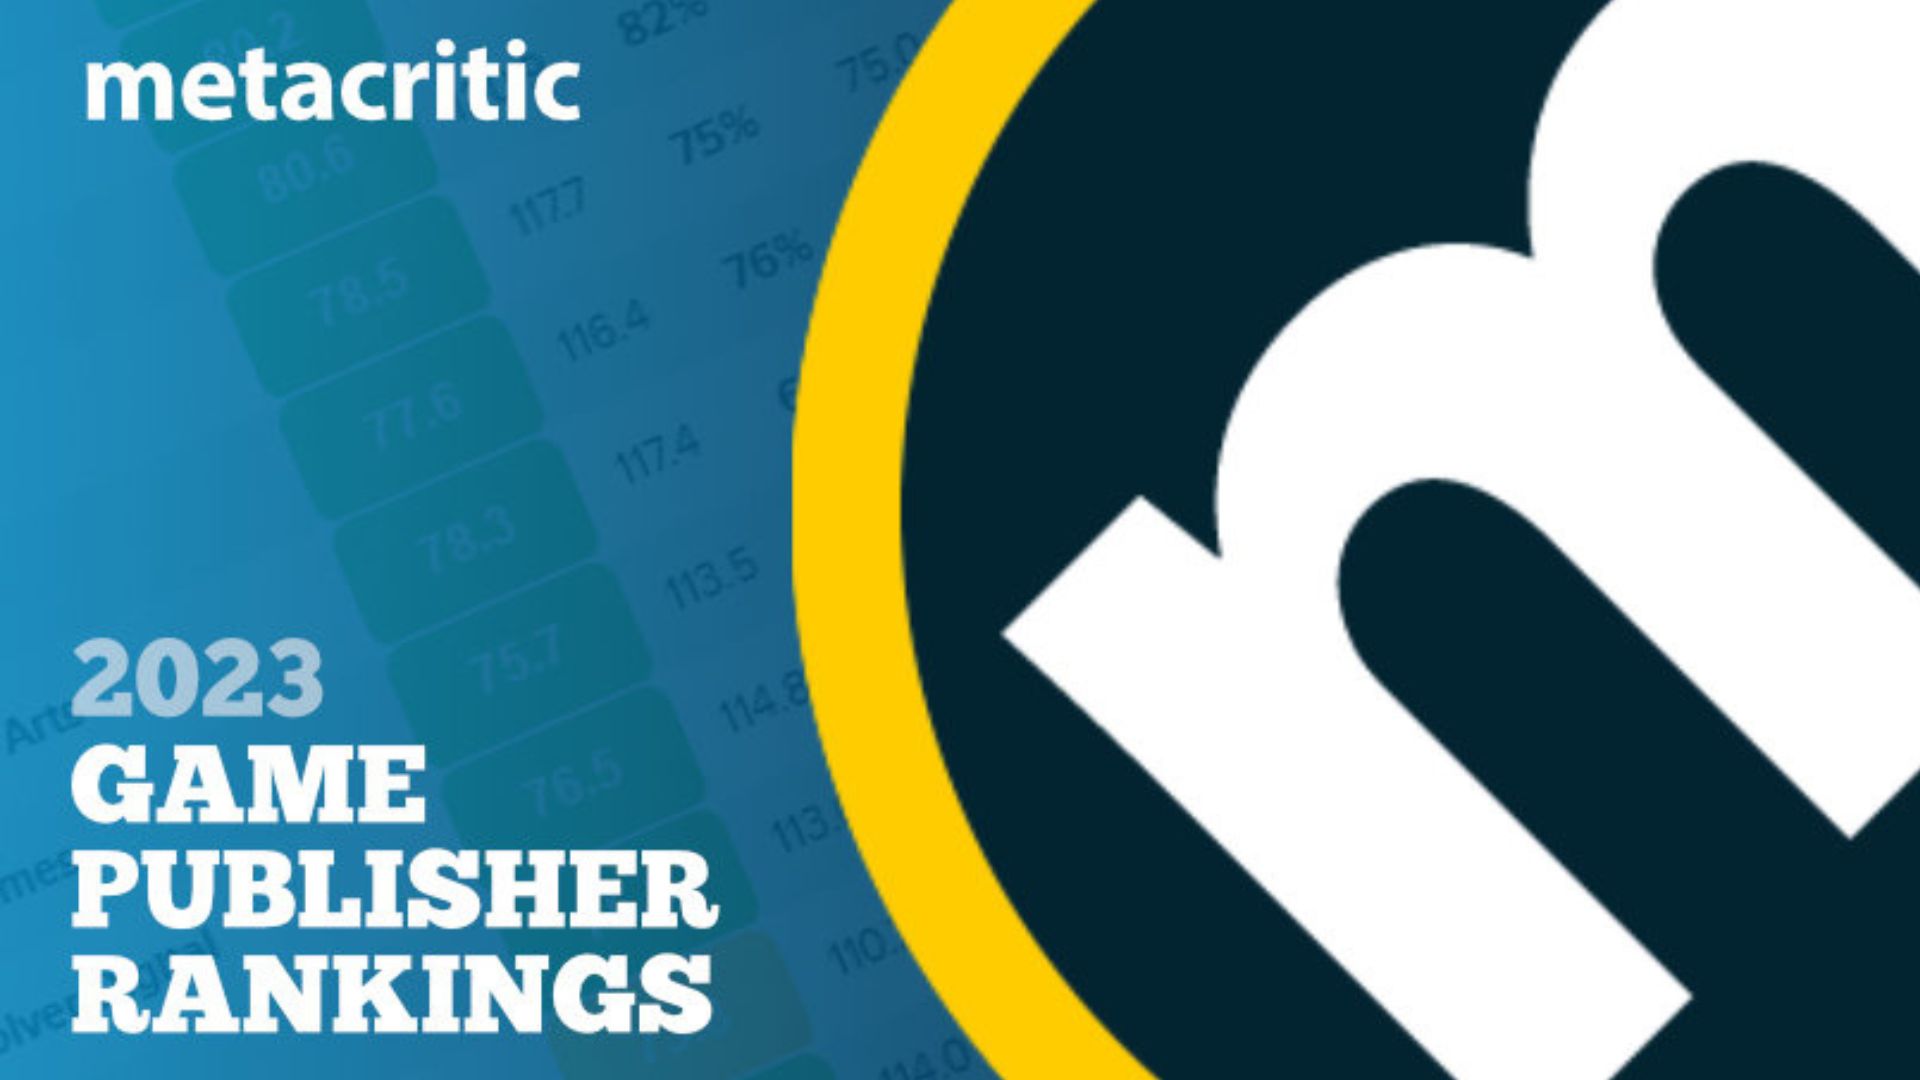 Metacritic's Game Publisher Rankings